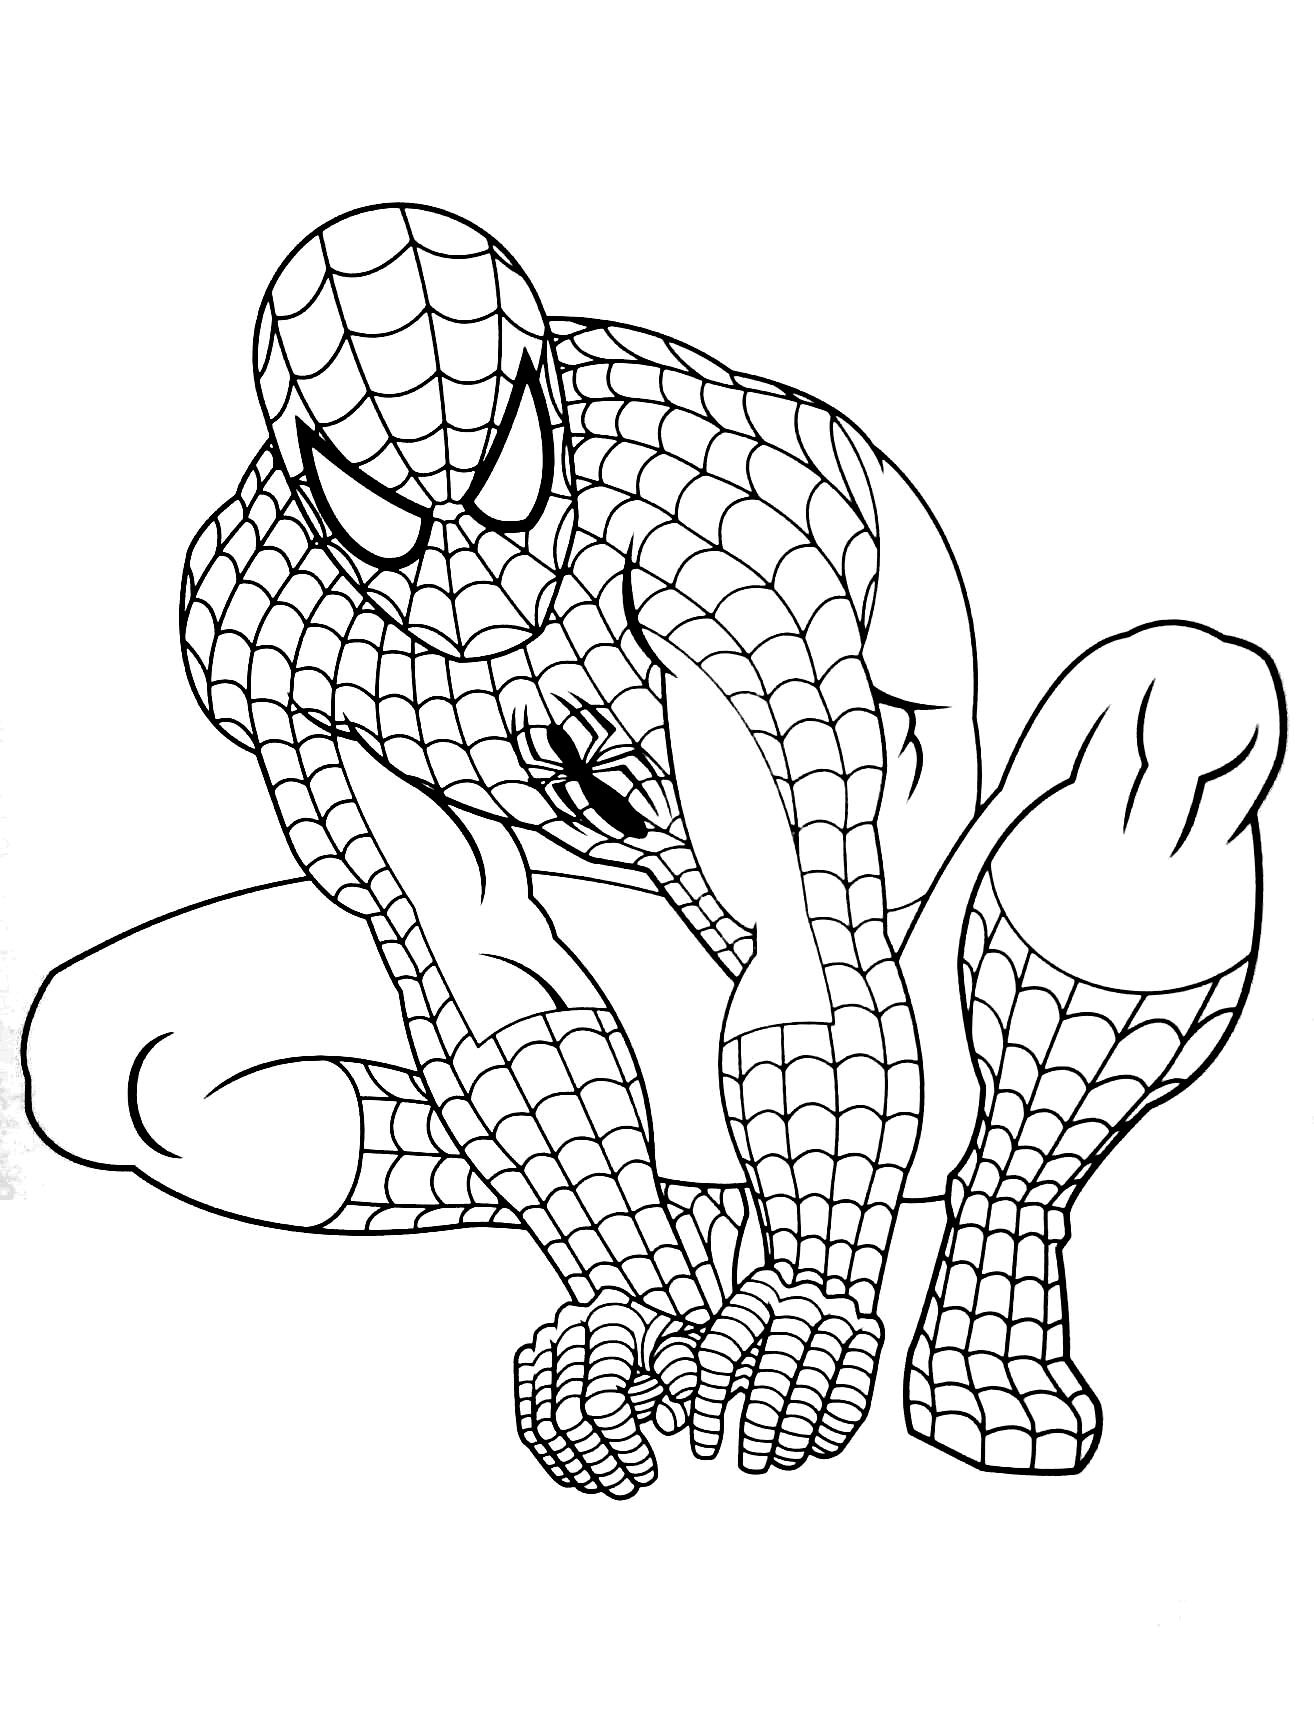 Spiderman Coloring Pages For Kids
 Spiderman to print for free Spiderman Kids Coloring Pages